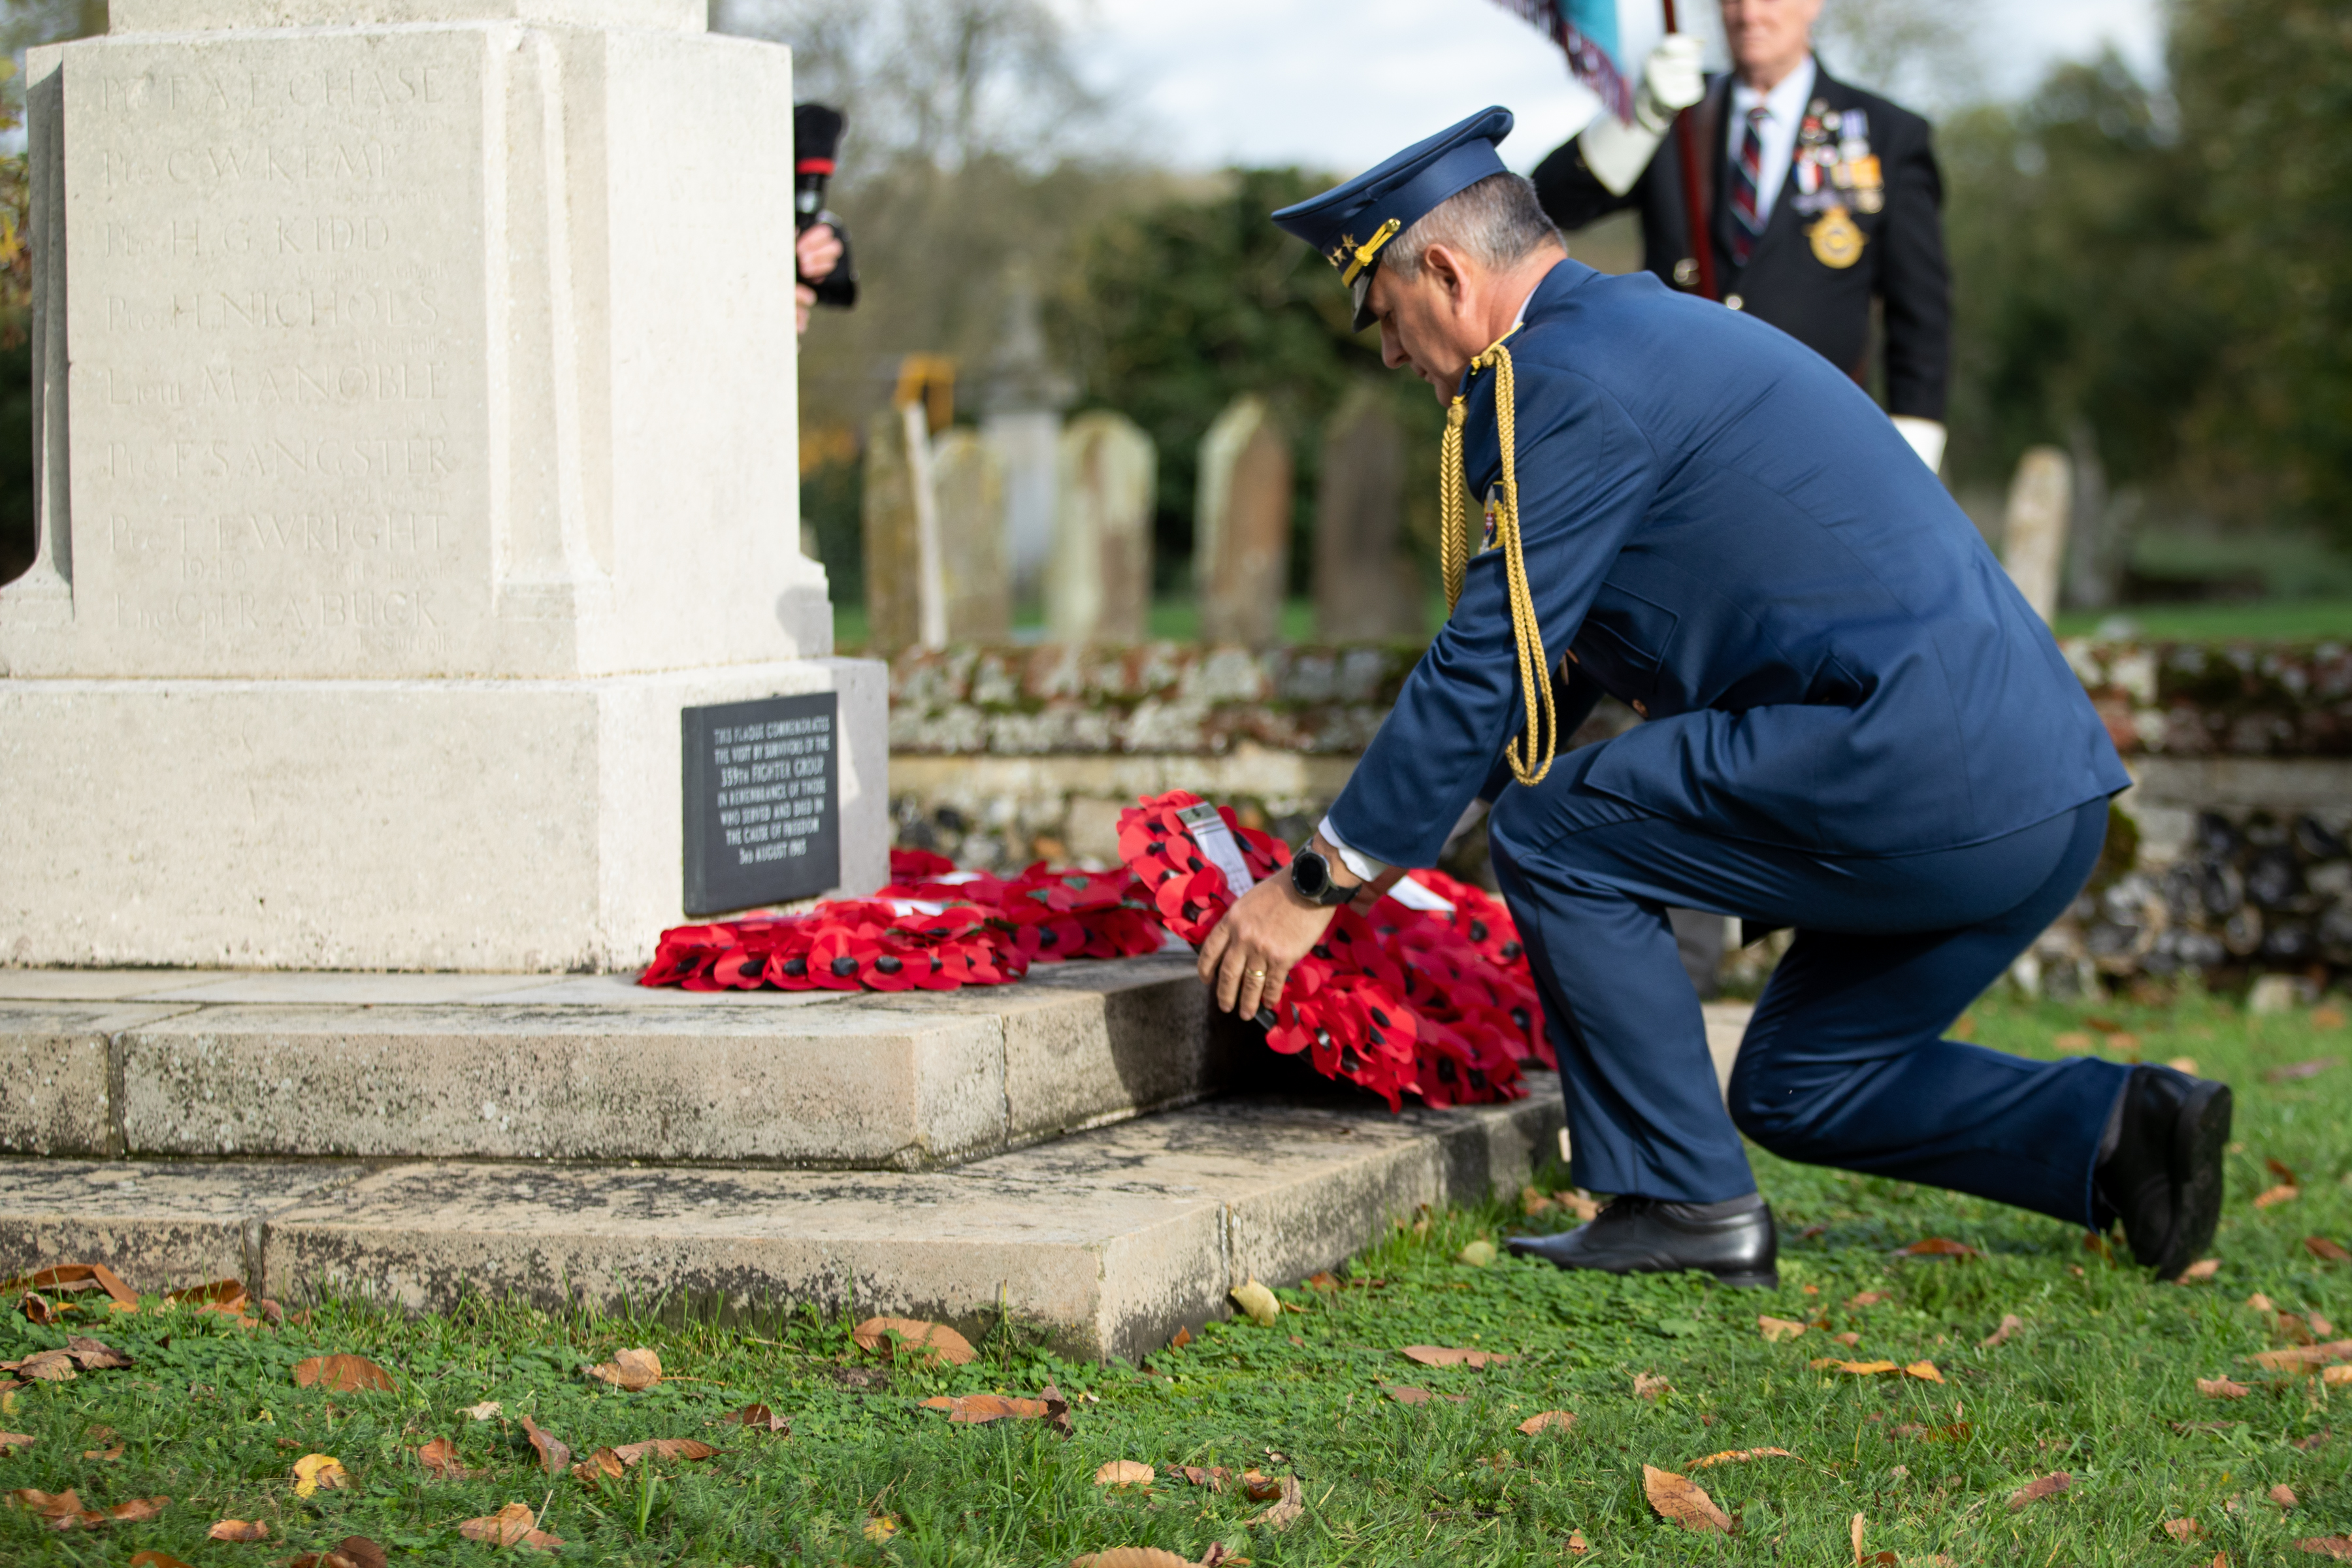 Image shows RAF aviator laying a poppy wreath by a memorial.